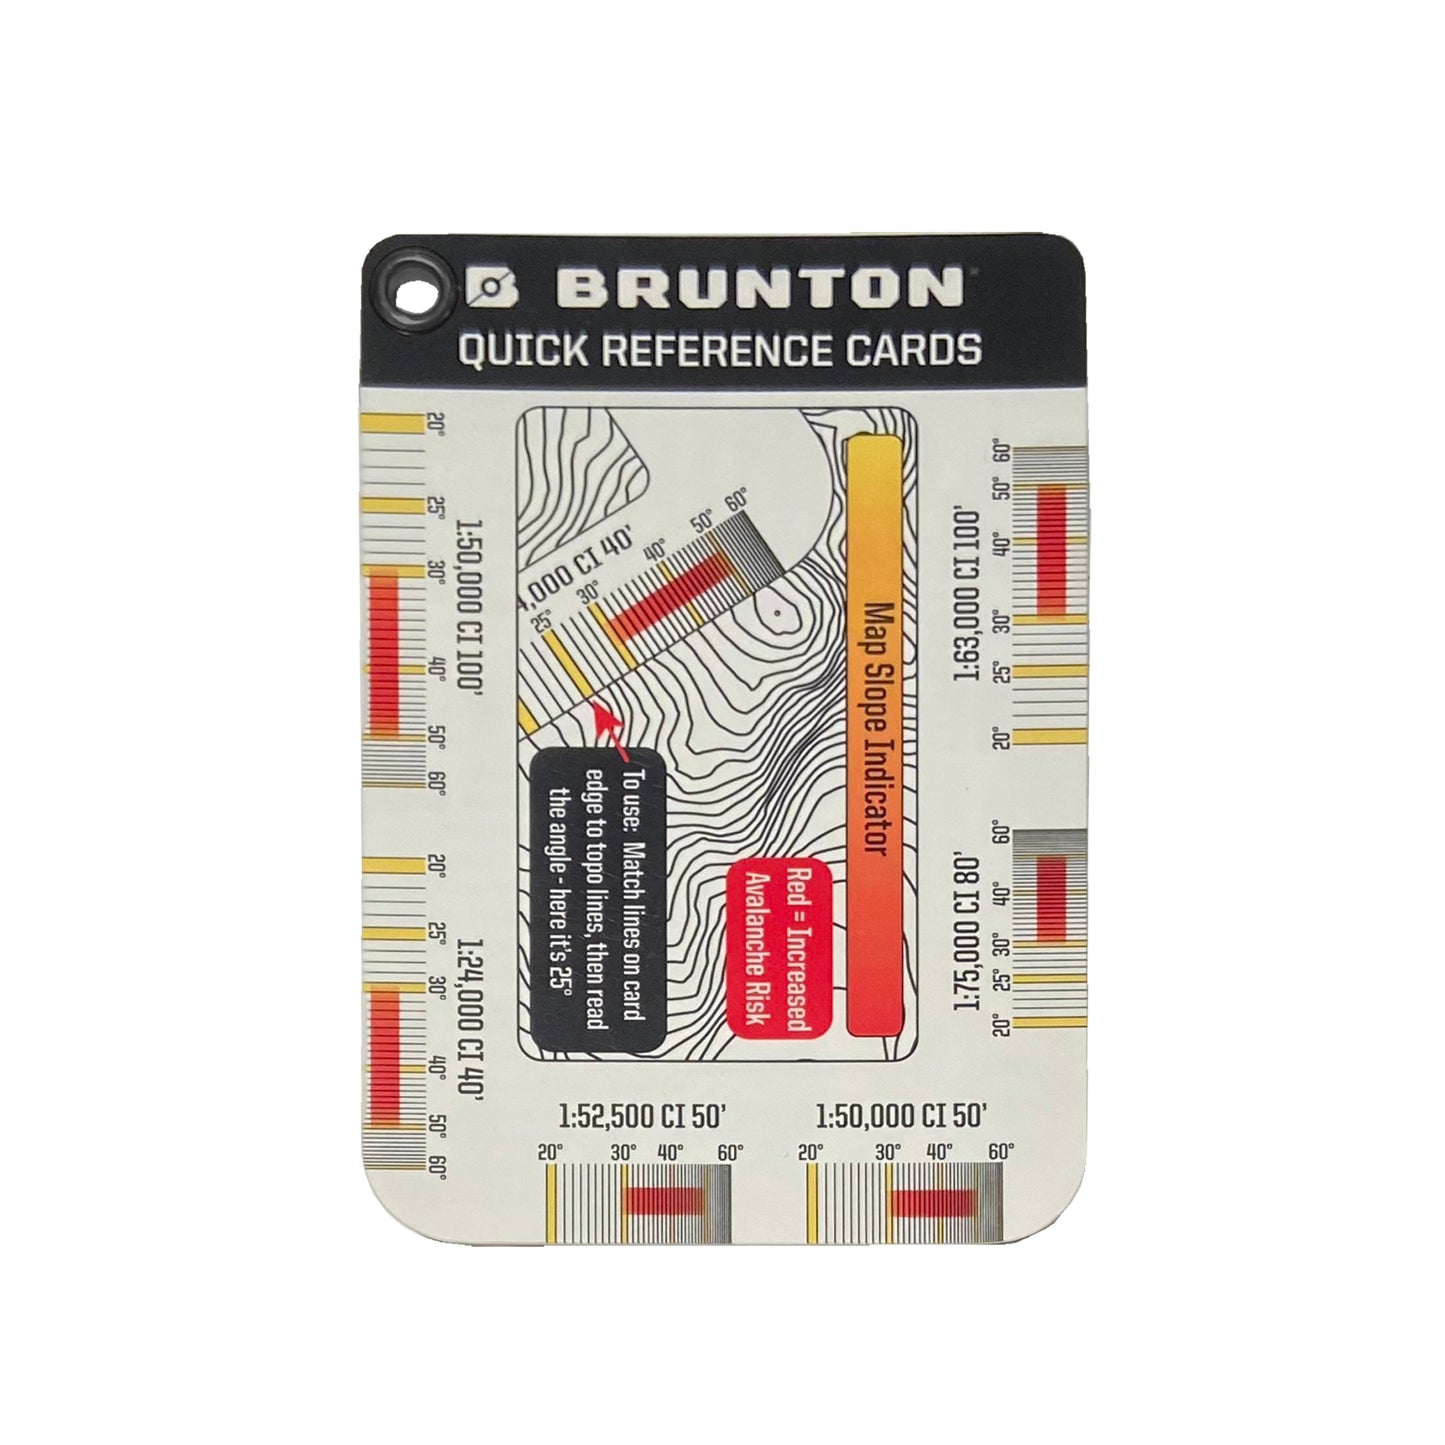 Brunton Backcountry Use Quick Reference Navigation Cards